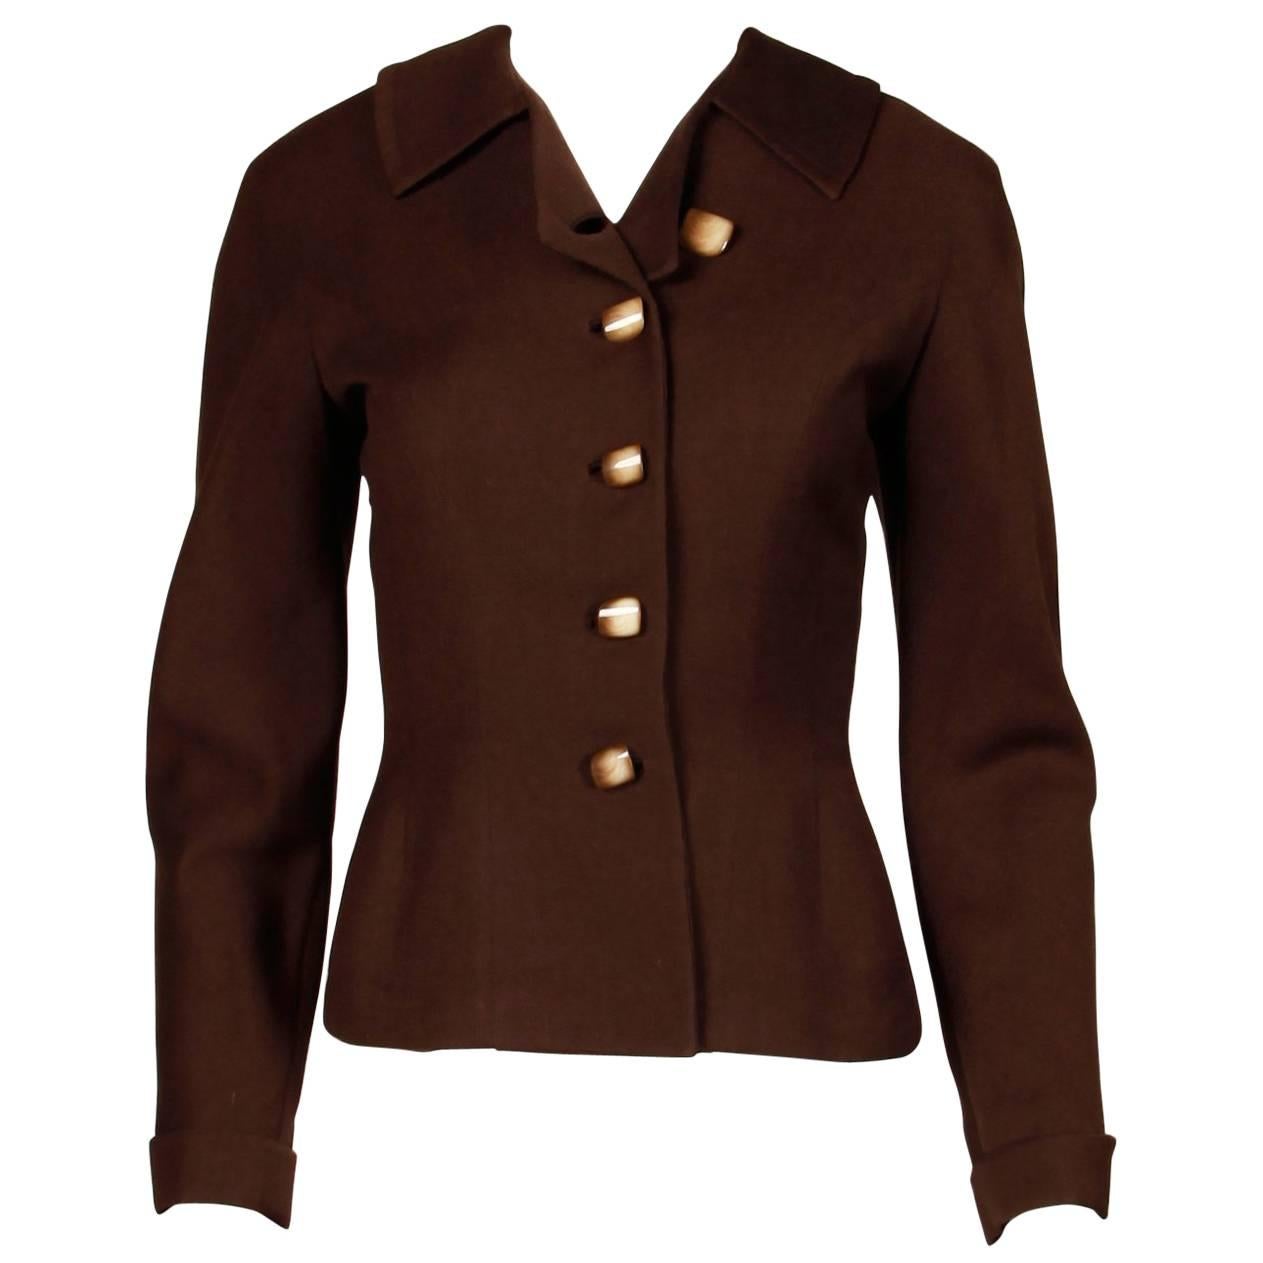 1950s Cari Colette Vintage New Look Brown Wool Tailored Jacket For Sale